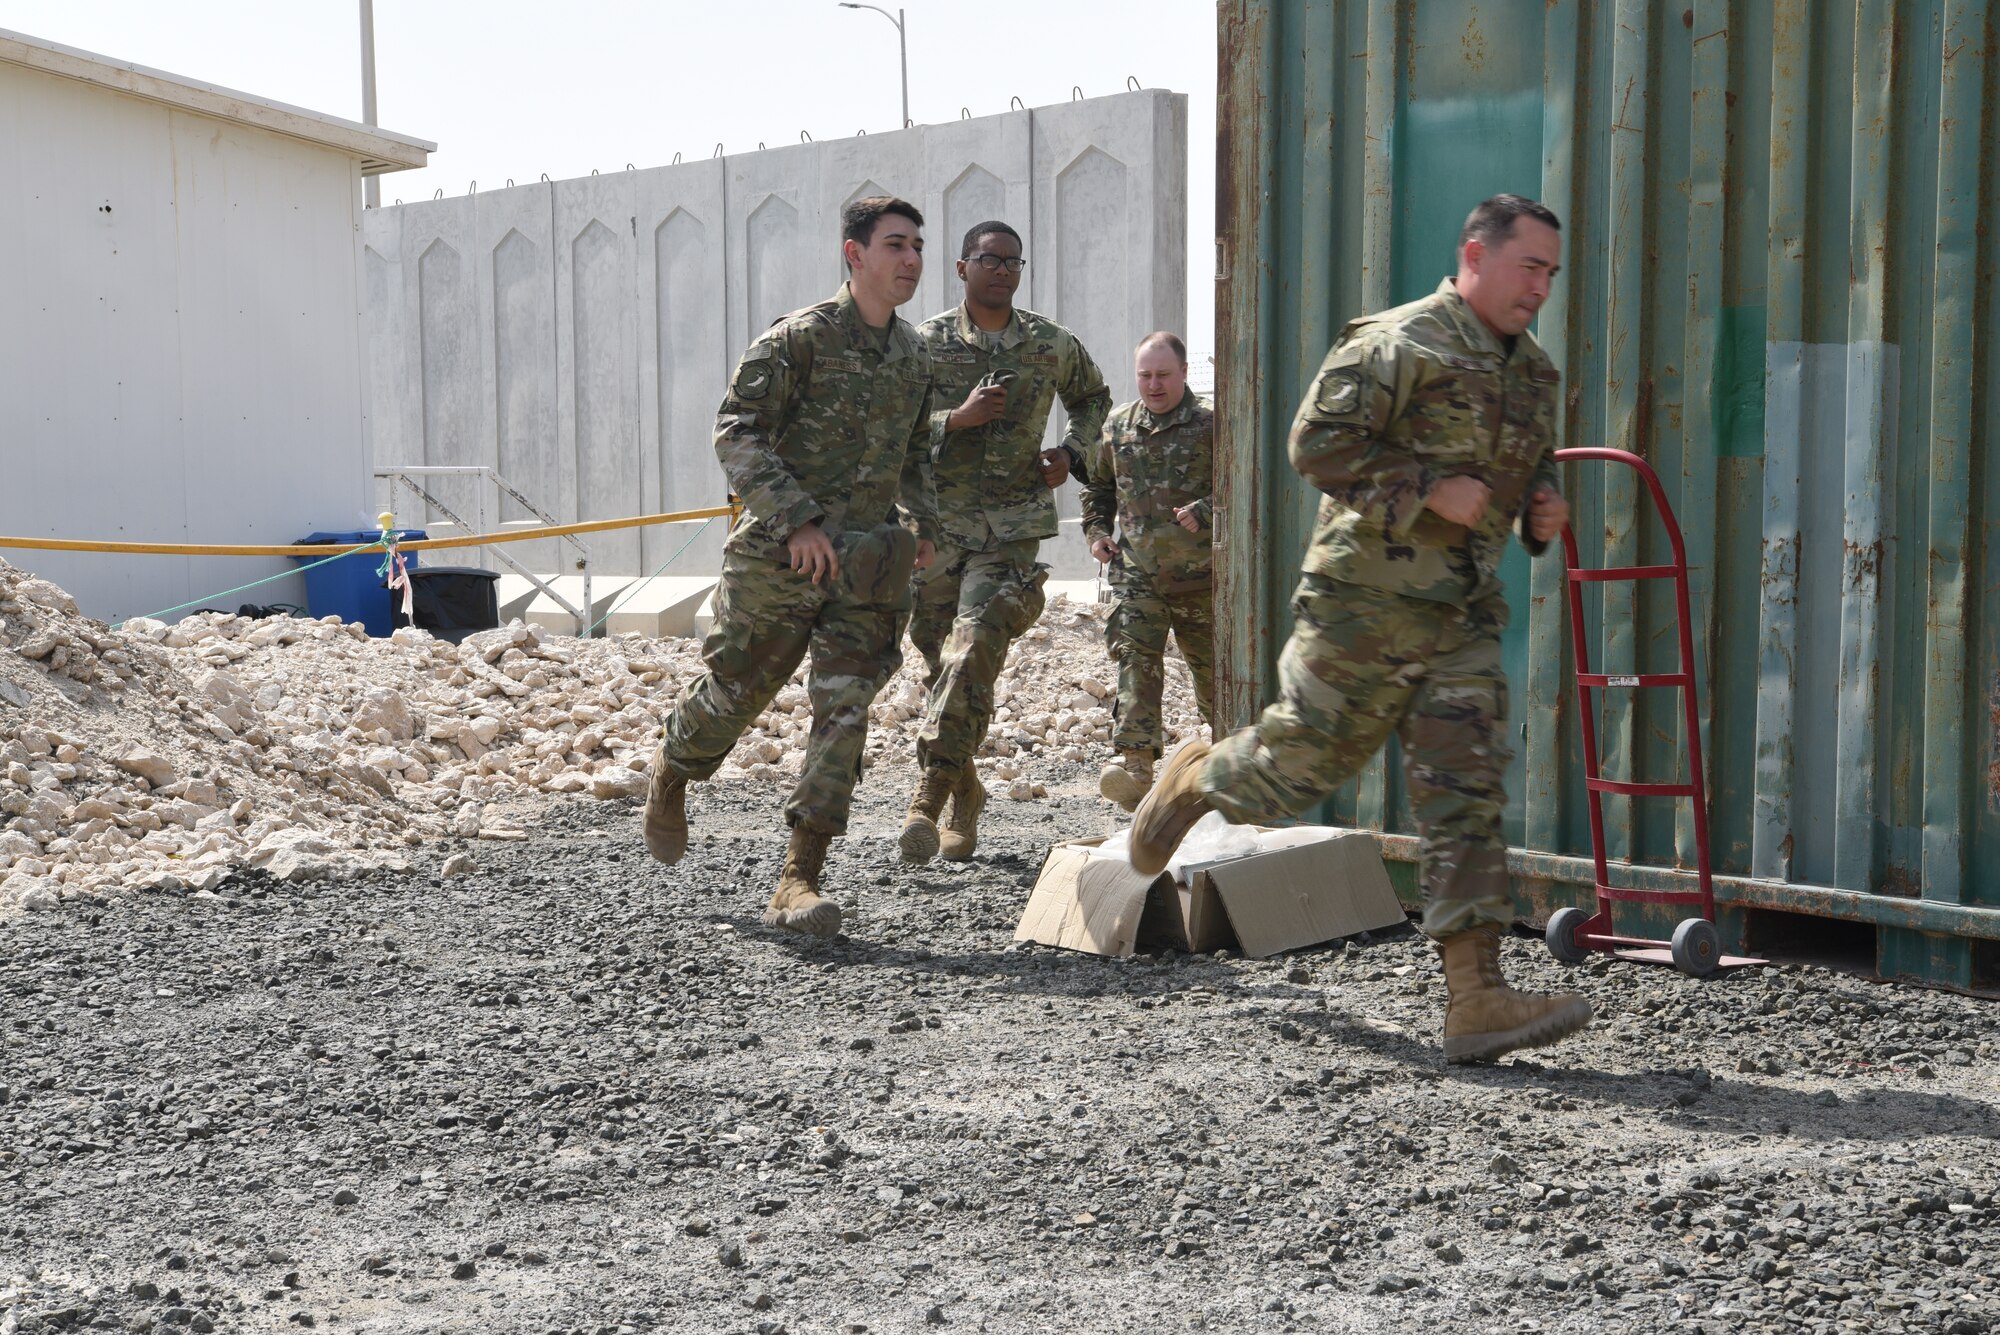 Members of the 380th Expeditionary Communications Squadron run to a bunker during an exercise May 28, 2019, on Al Dhafra Air Base, United Arab Emirates.